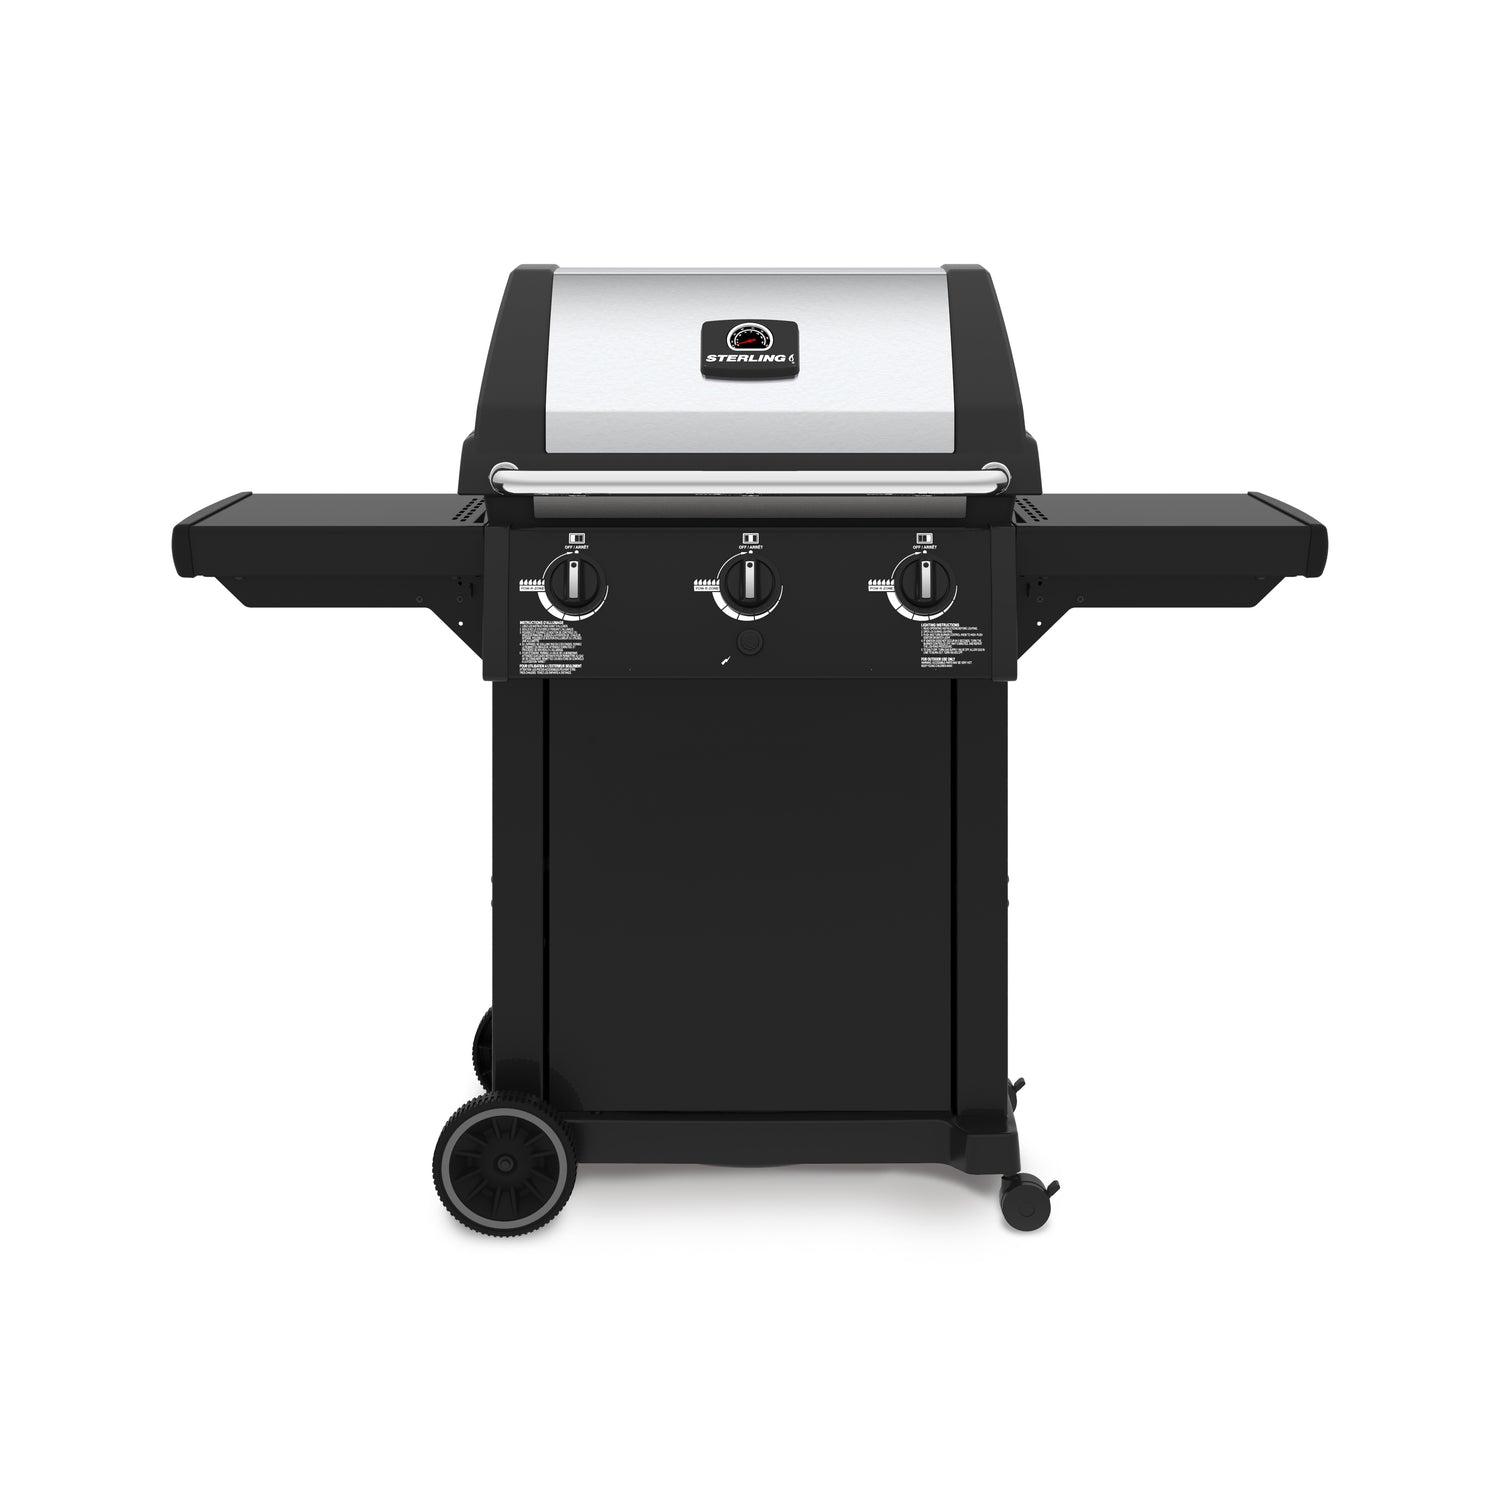 The Sterling Winston is a great grill that gives you a ton of value and bang for your buck. Barbecues Galore: Burlington, Oakville, Etobicoke & Calgary